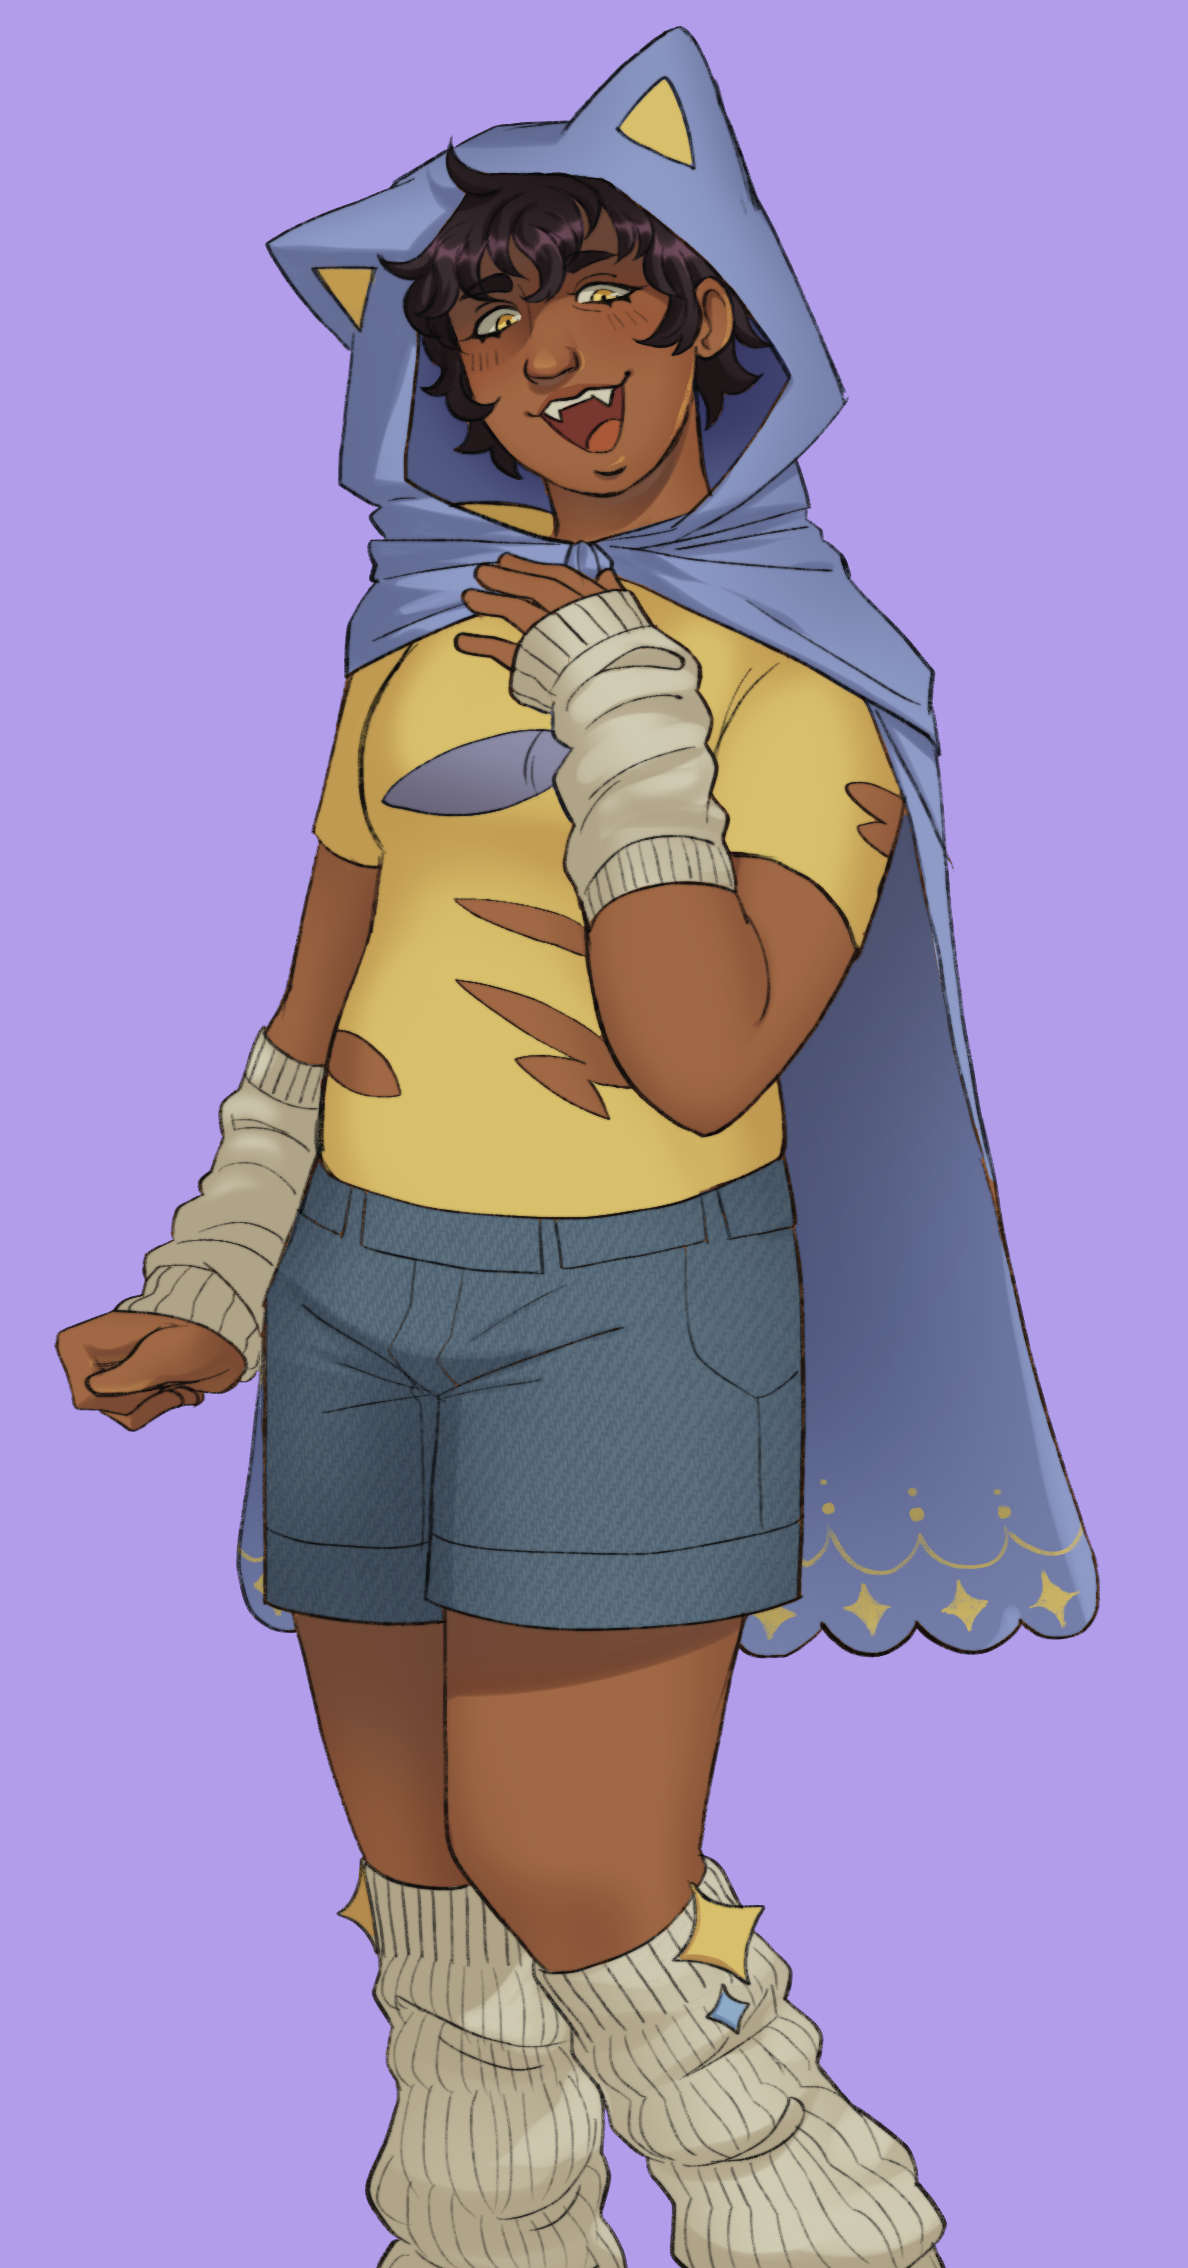 An illustration of a chubby, androgynous character with brown skin, dark shaggy hair, and yellow cat-like eyes. She is wearing a light blue cape with a hood, which has cat ears on top. The cat ears have one little, yellow triangle on each. And her cape falls down her back to the back of her calves. It is decorated on its edge with a simple, starry design. She is wearing white arm and leg warmers and a ripped, yellow shirt. She is holding one hand up near her chest and looking down while laughing.